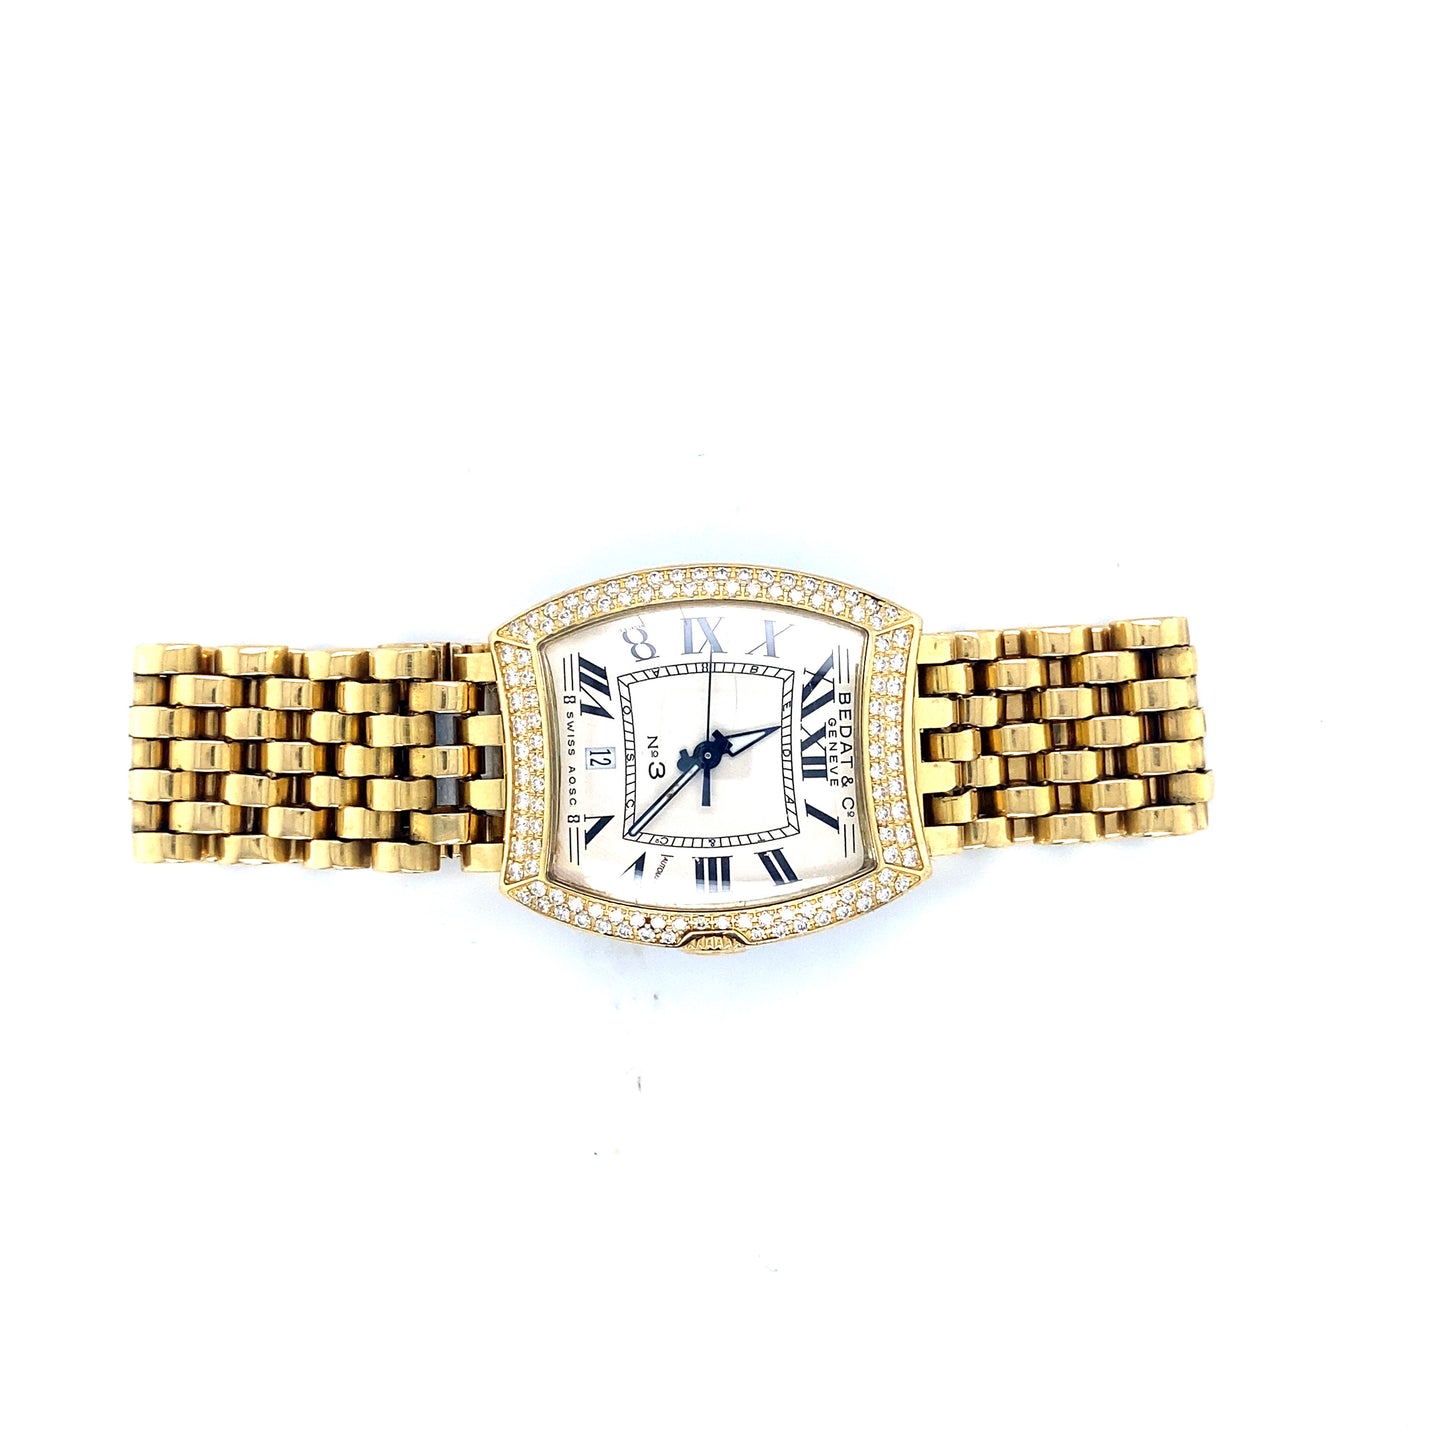 Swiss Bedat watch with 18kt gold and diamonds